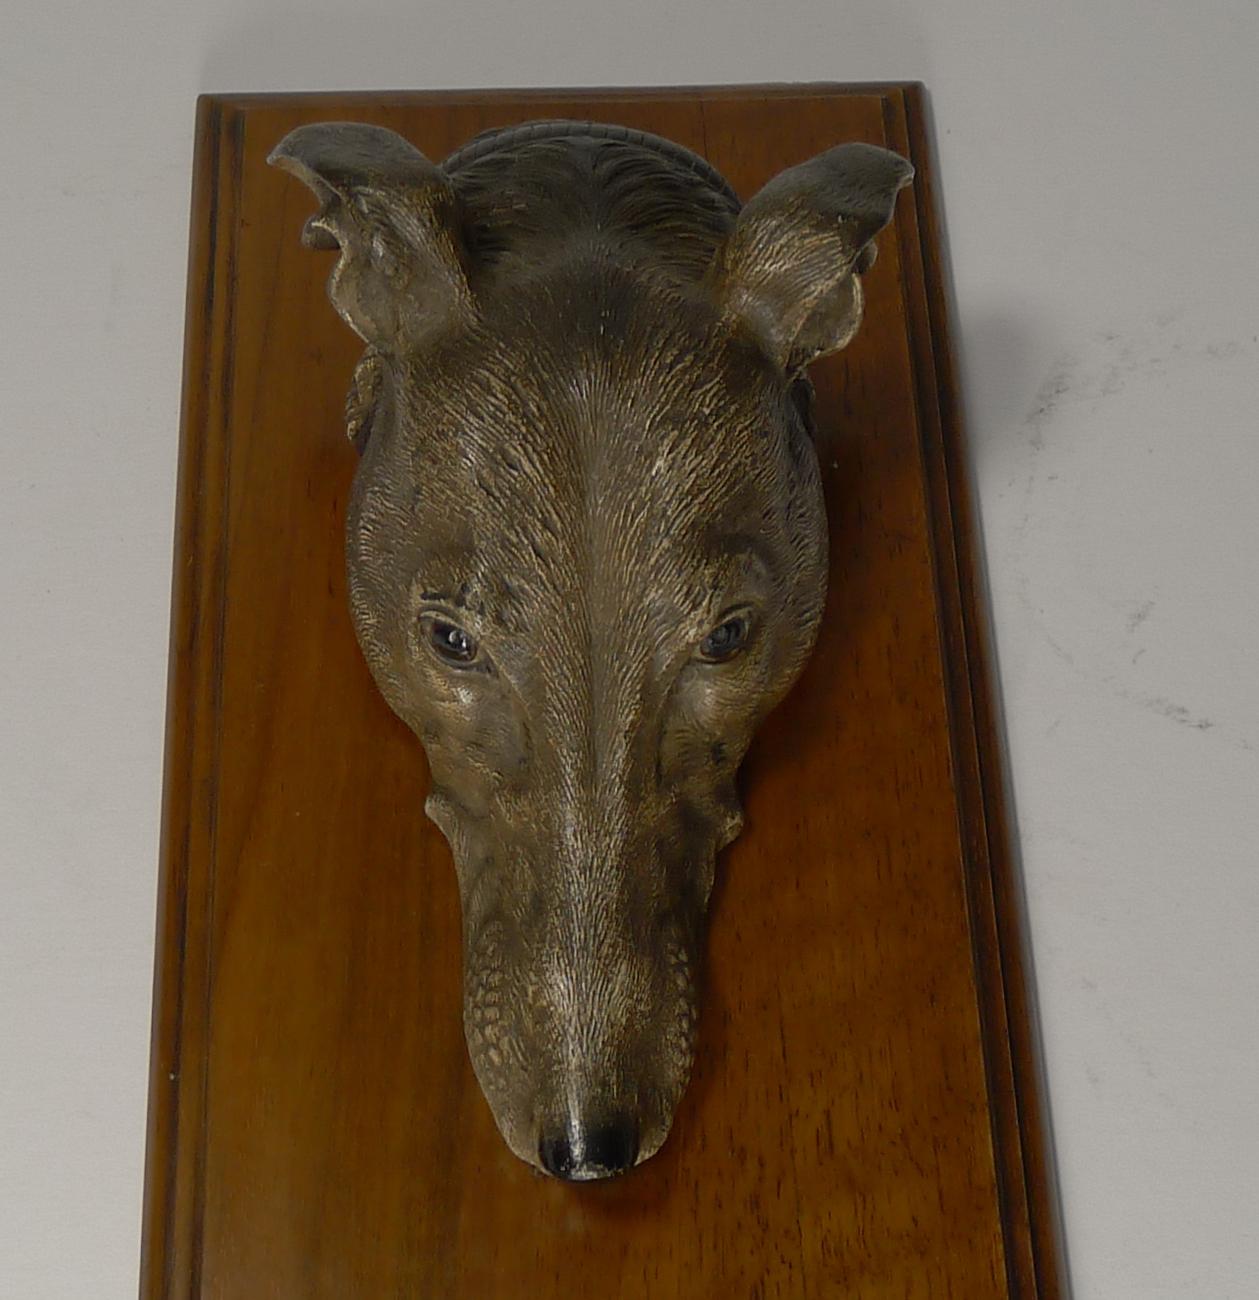 A fabulous and very grand desk-top letter clip featuring a handsome cold-painted bronze greyhound's head, beautifully executed. 

The sprung clip sits on the original mahogany base.

Late Victorian in era dating to circa 1890-1900. Measures: 10